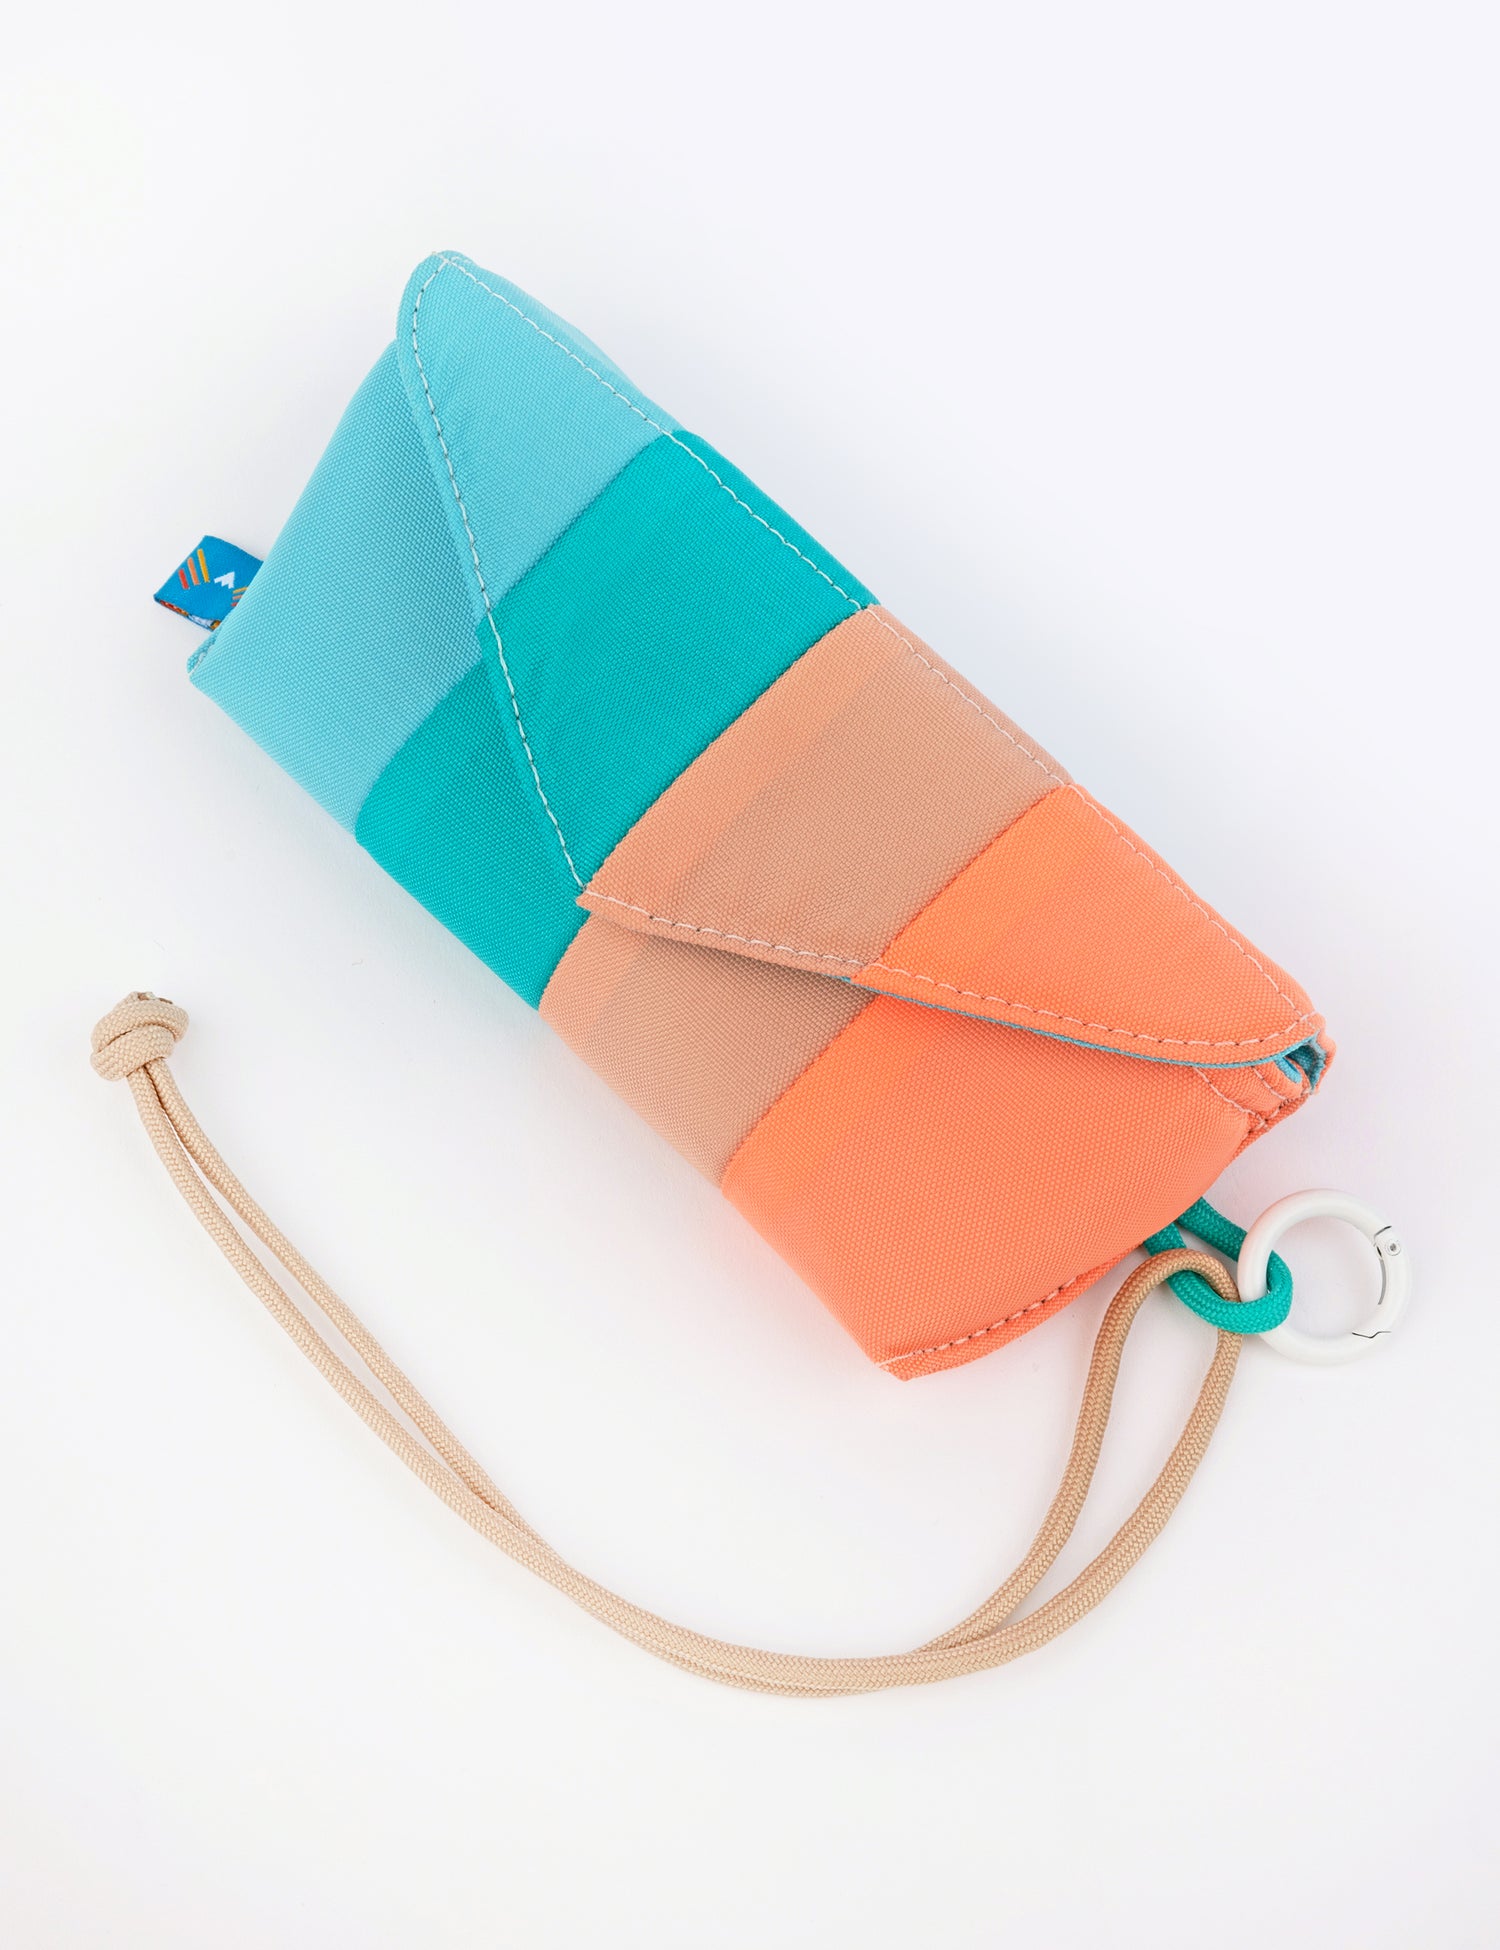 rectangular sunglasses case with light blues and corals stripe design